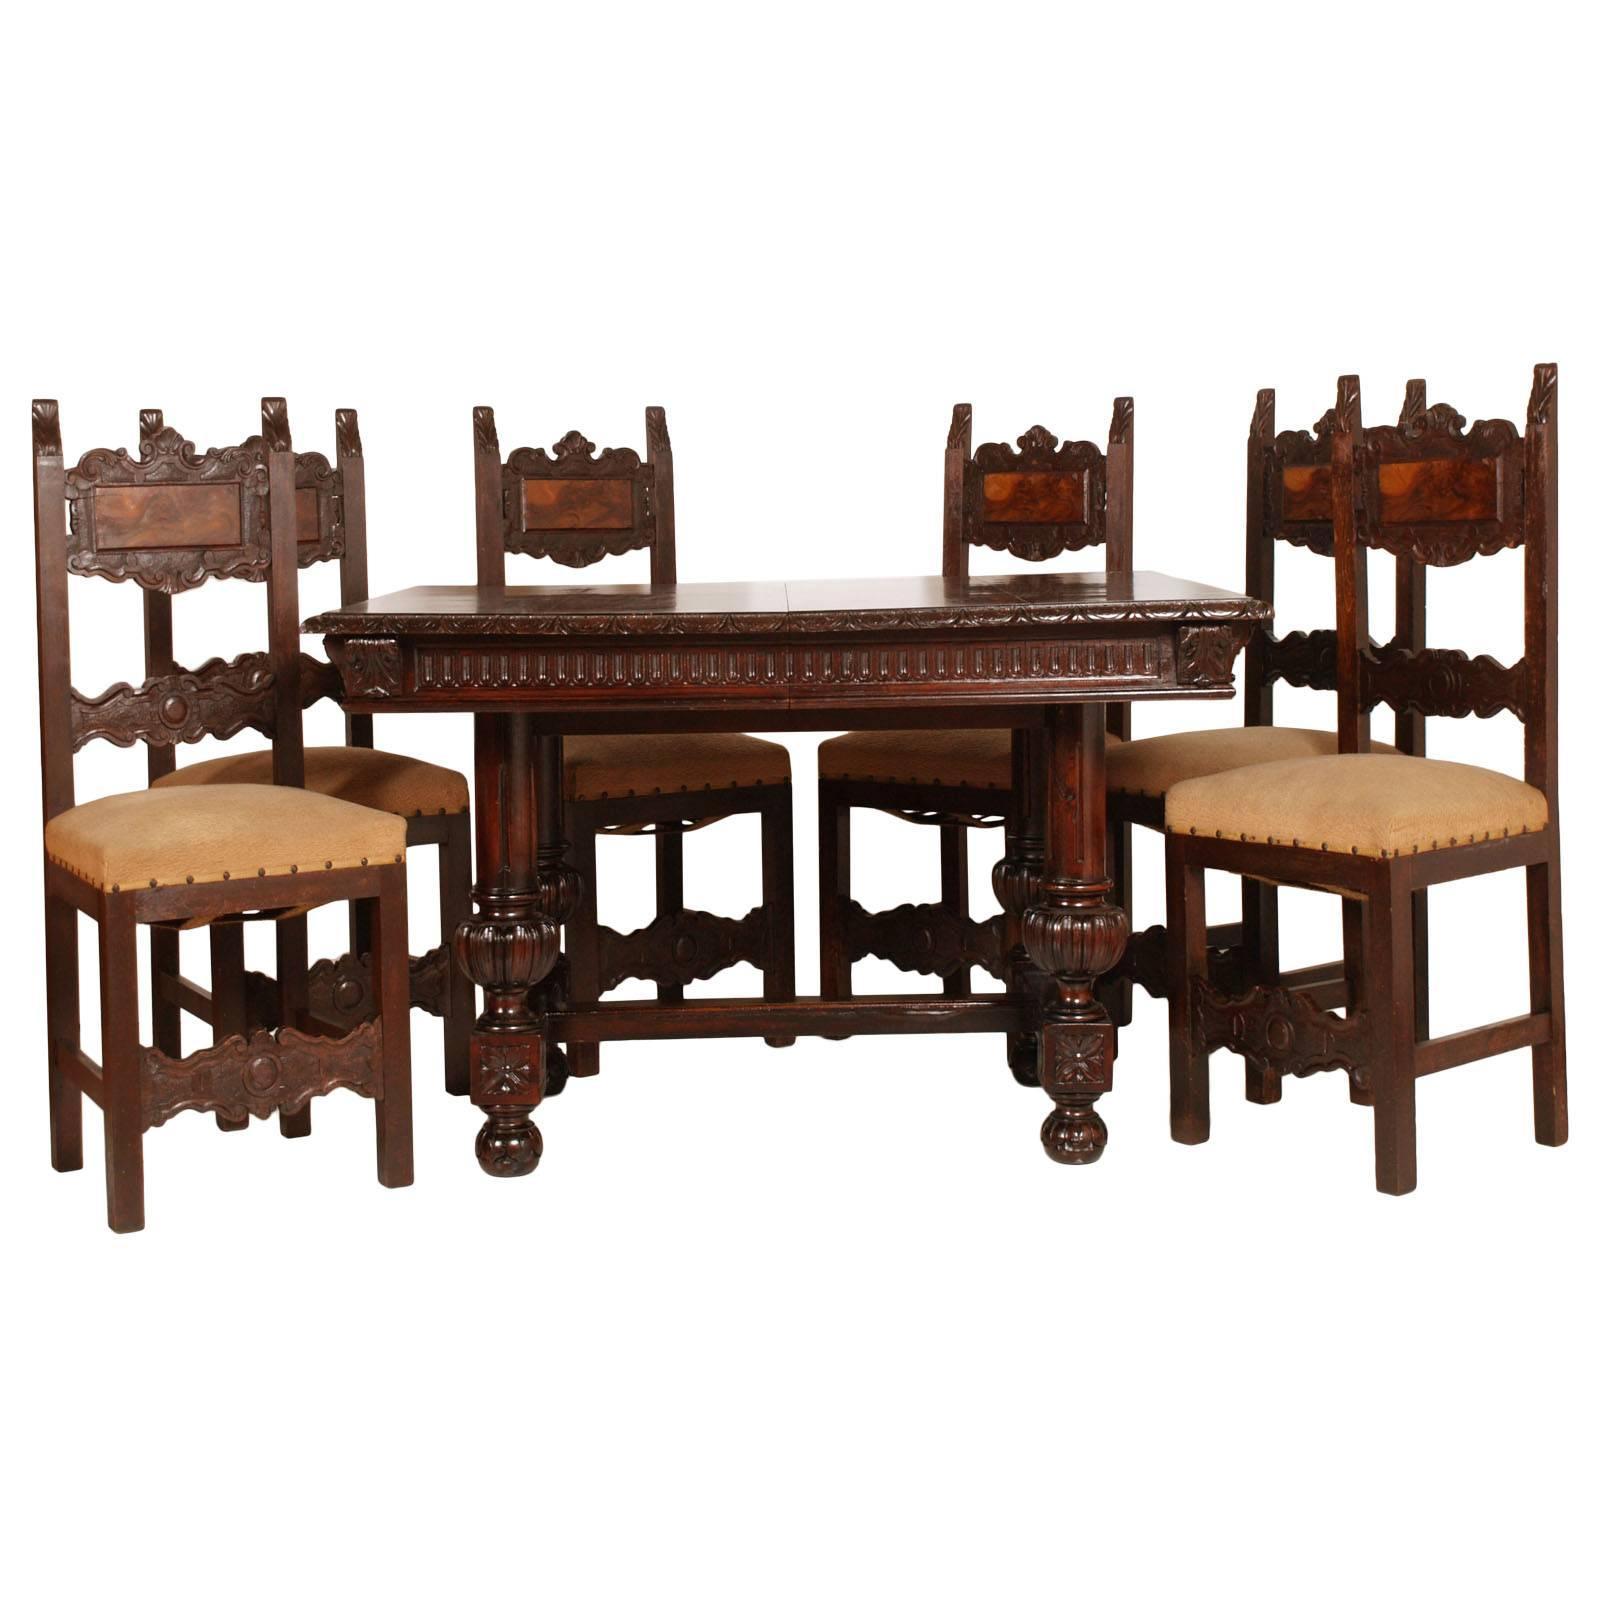 Tuscany 19th Century Renaissance Table with Six Chairs, Hand-Carved Walnut